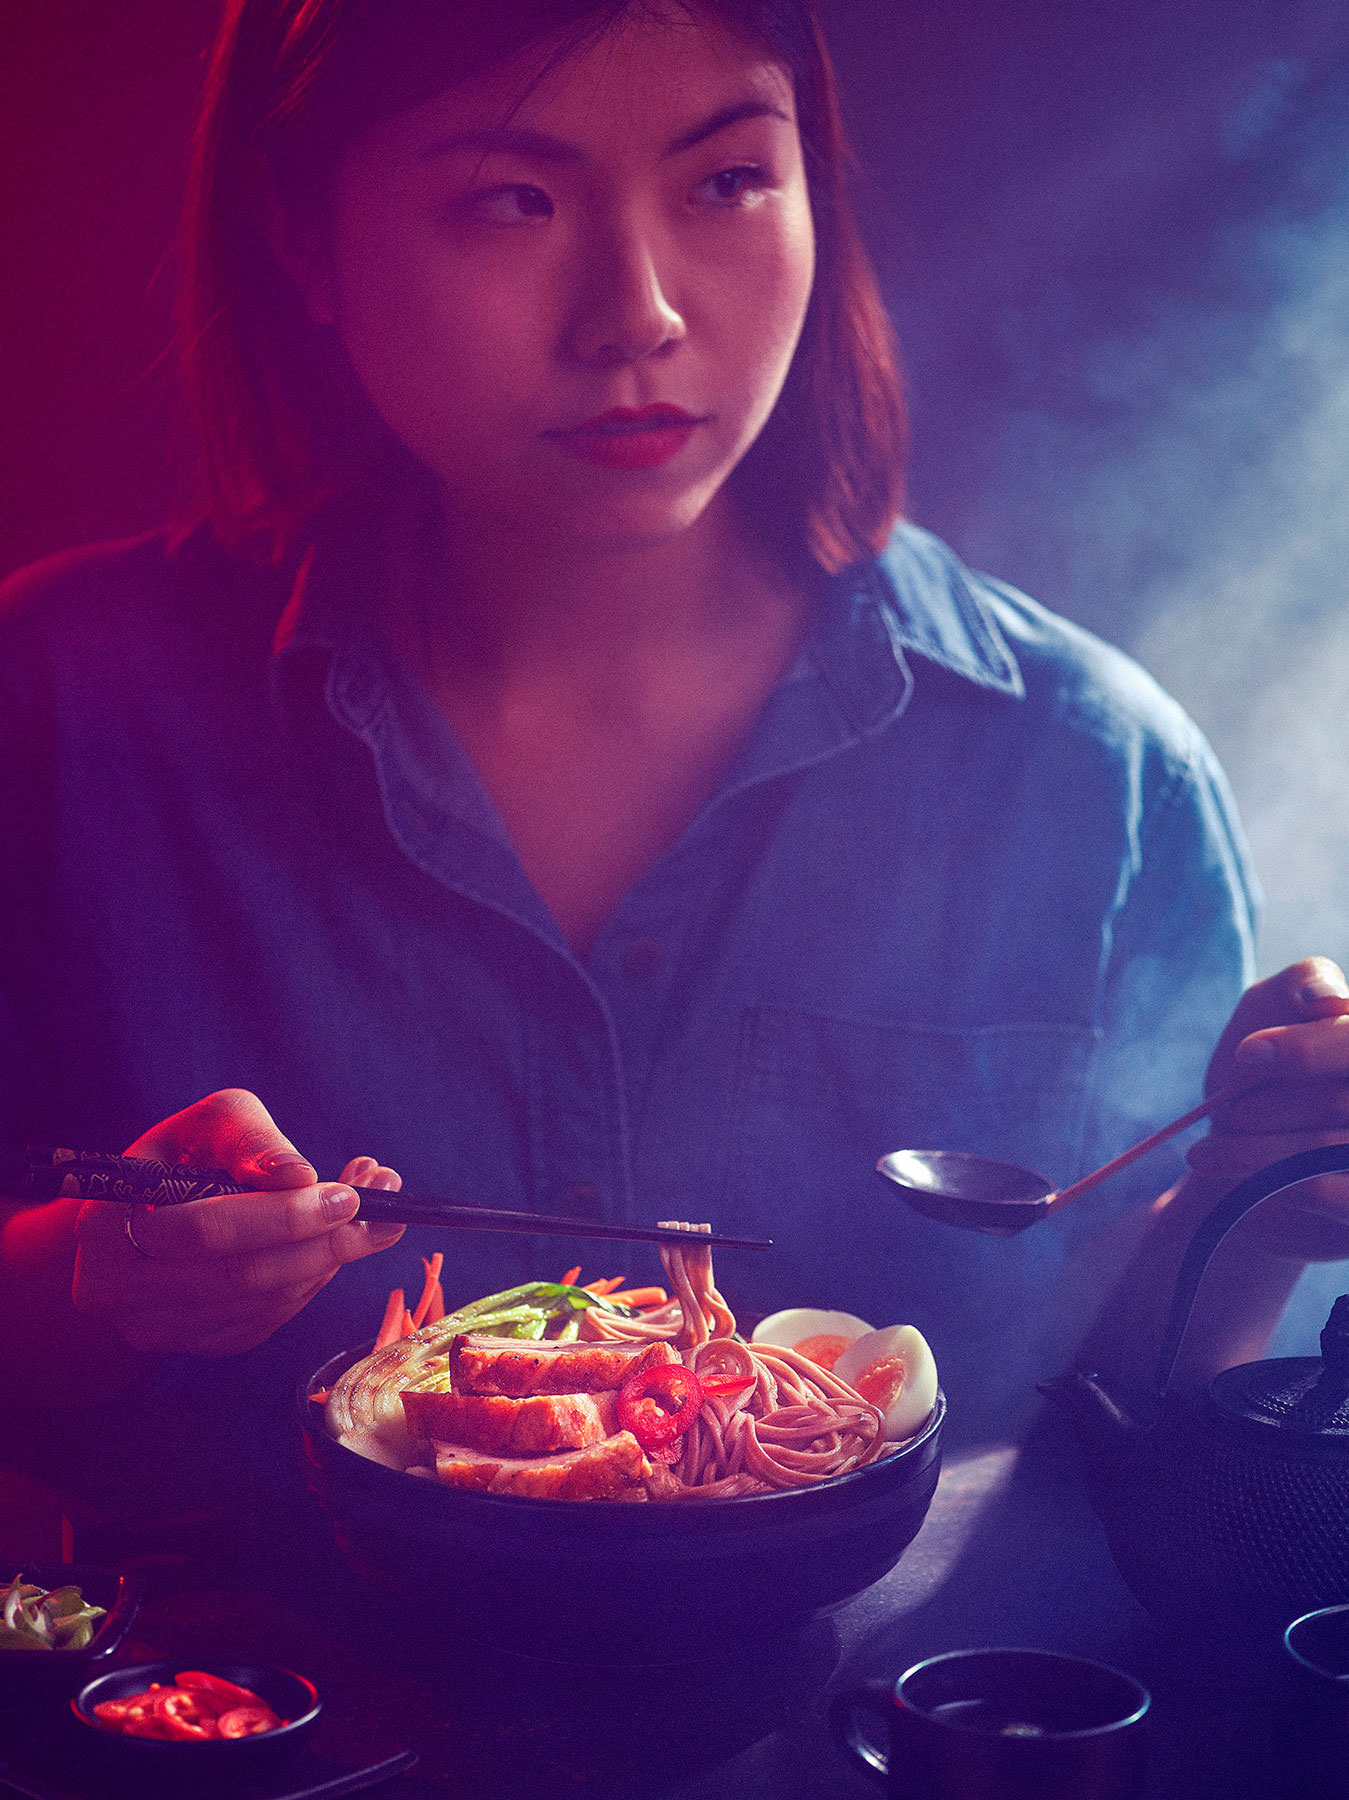 Ramen being eaten by Japanese women in a late night cafe setting - London Food & Drinks Photographer